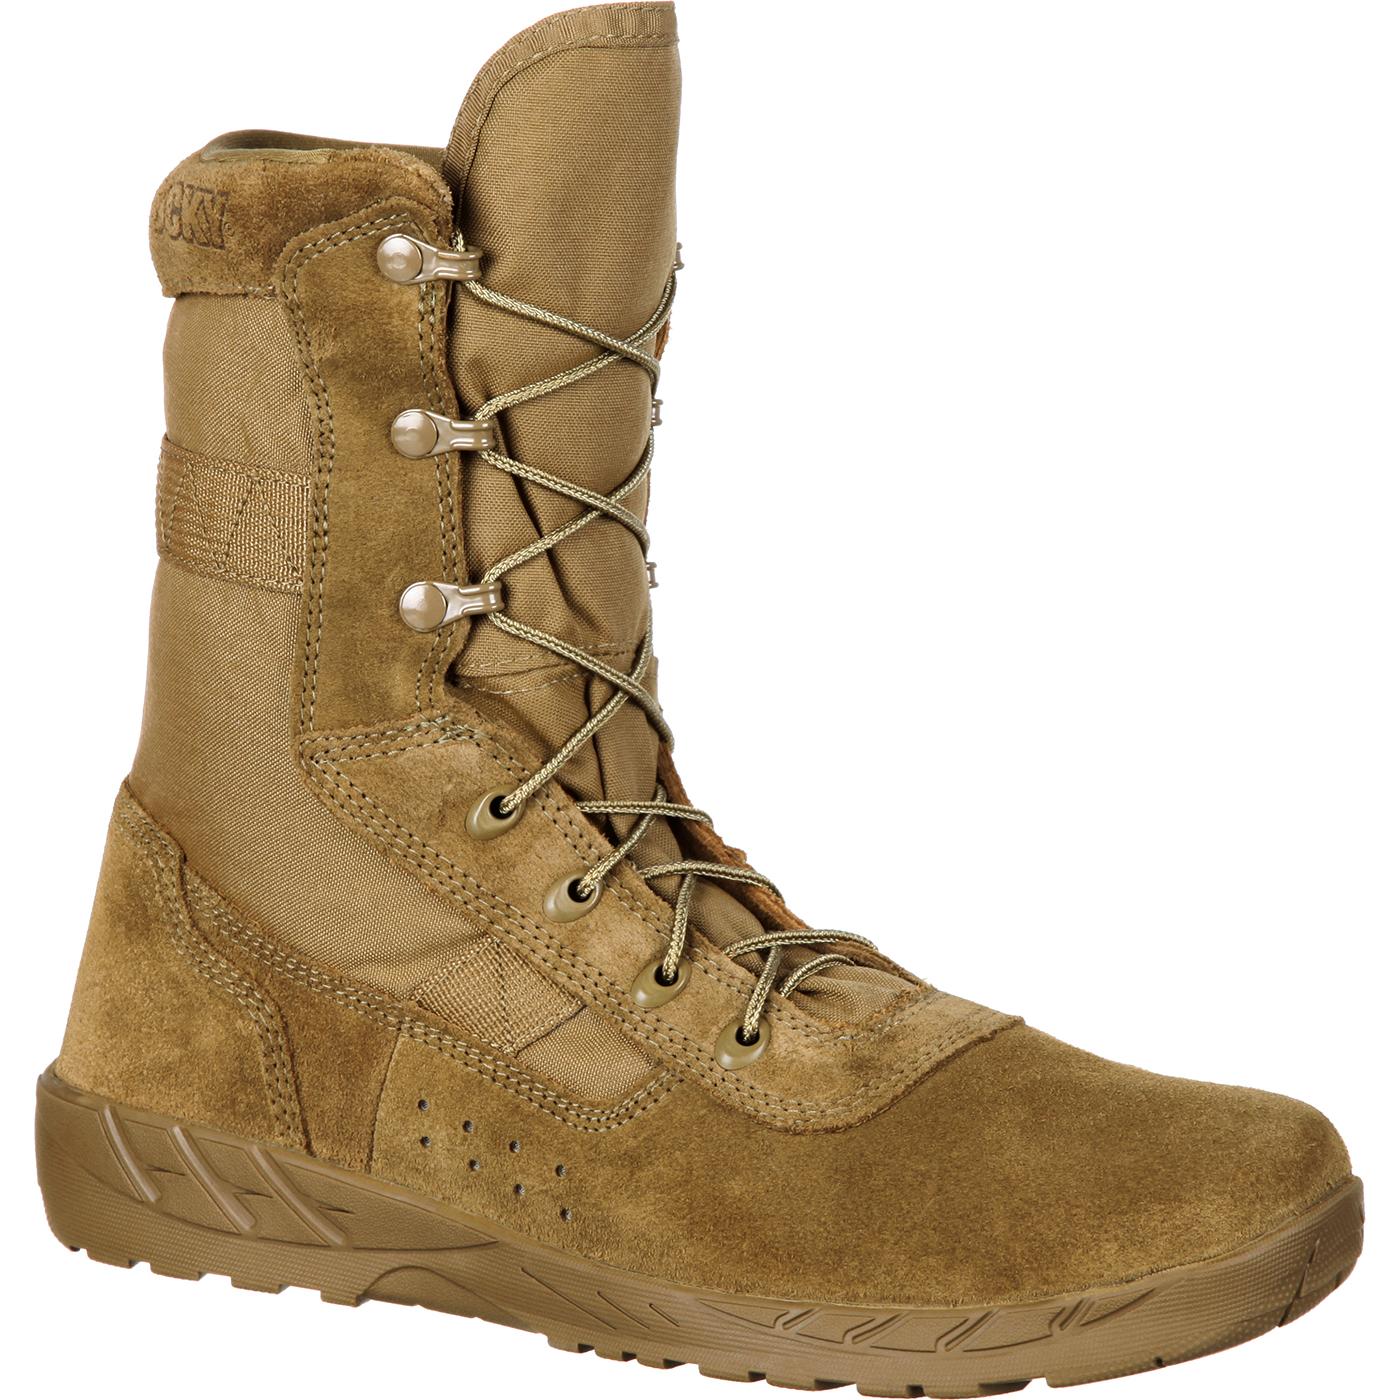 army boots rocky c7 cxt lightweight commercial military boot, , large OHMWZKE